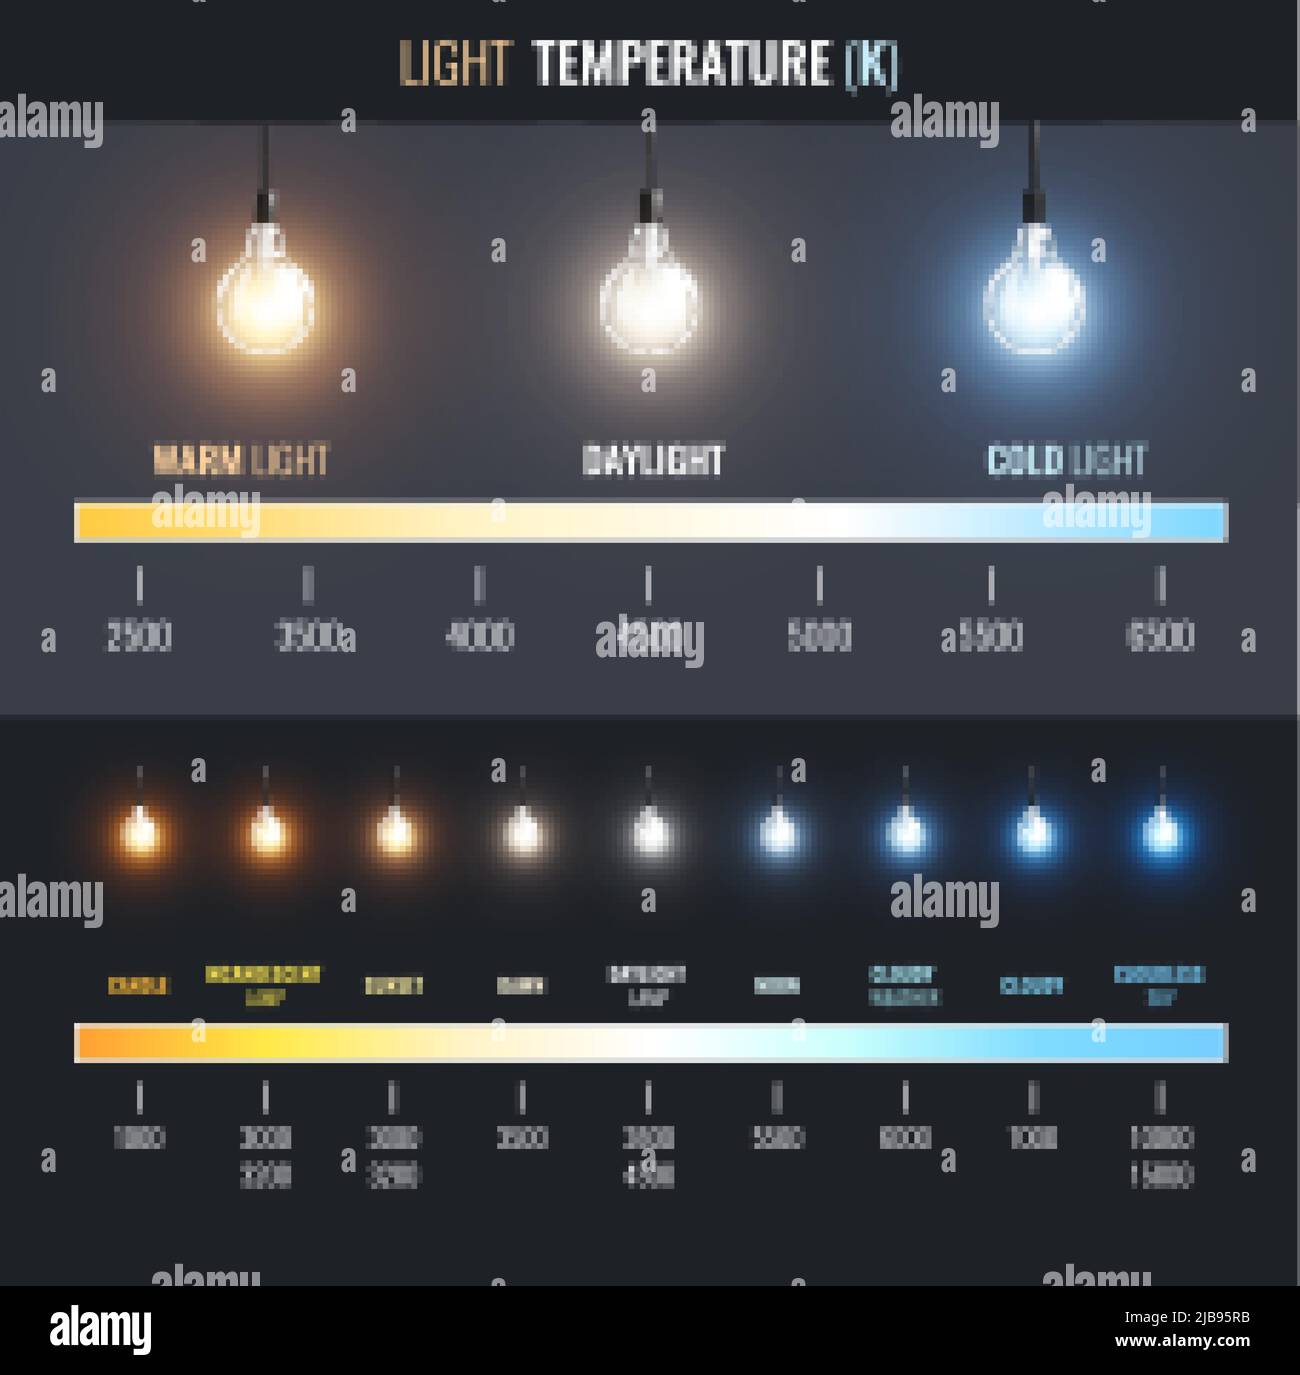 Light temperature infographics with linear chart from warm to cold lighting with text captions for applications vector illustration Stock Vector